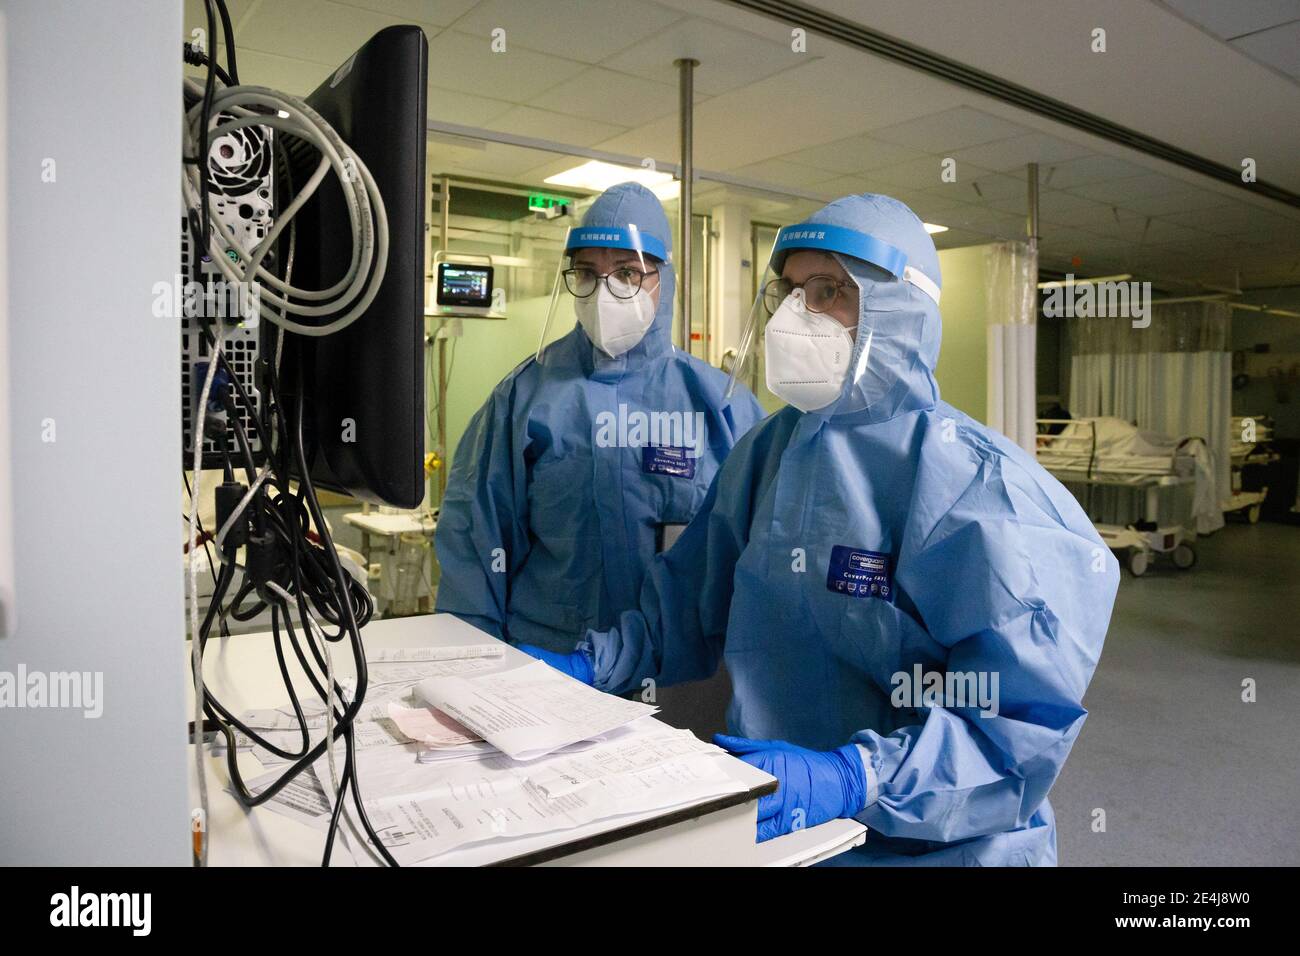 Porto, Portugal. 23rd Jan, 2021. Health workers wearing protective suits use  a computer to analyse the exams performed in the ward at the University  Hospital of São João do Porto.The University Hospital